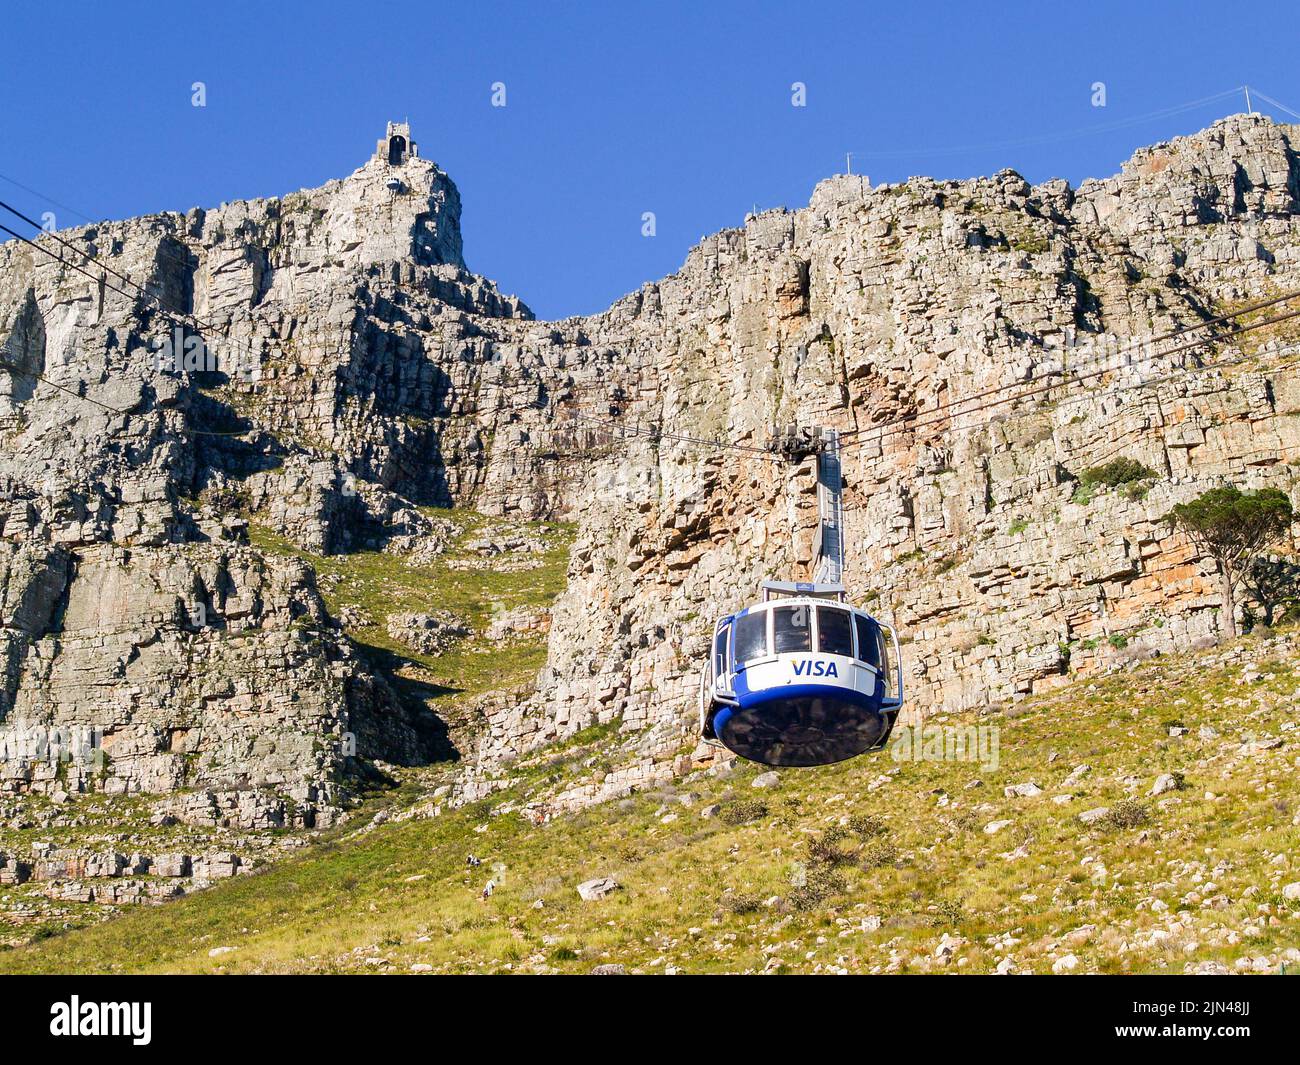 Capetown South Africa - August 25 2007; Table Mountain with Visa sponsored cable car rising to station at top of famous landmark. Stock Photo